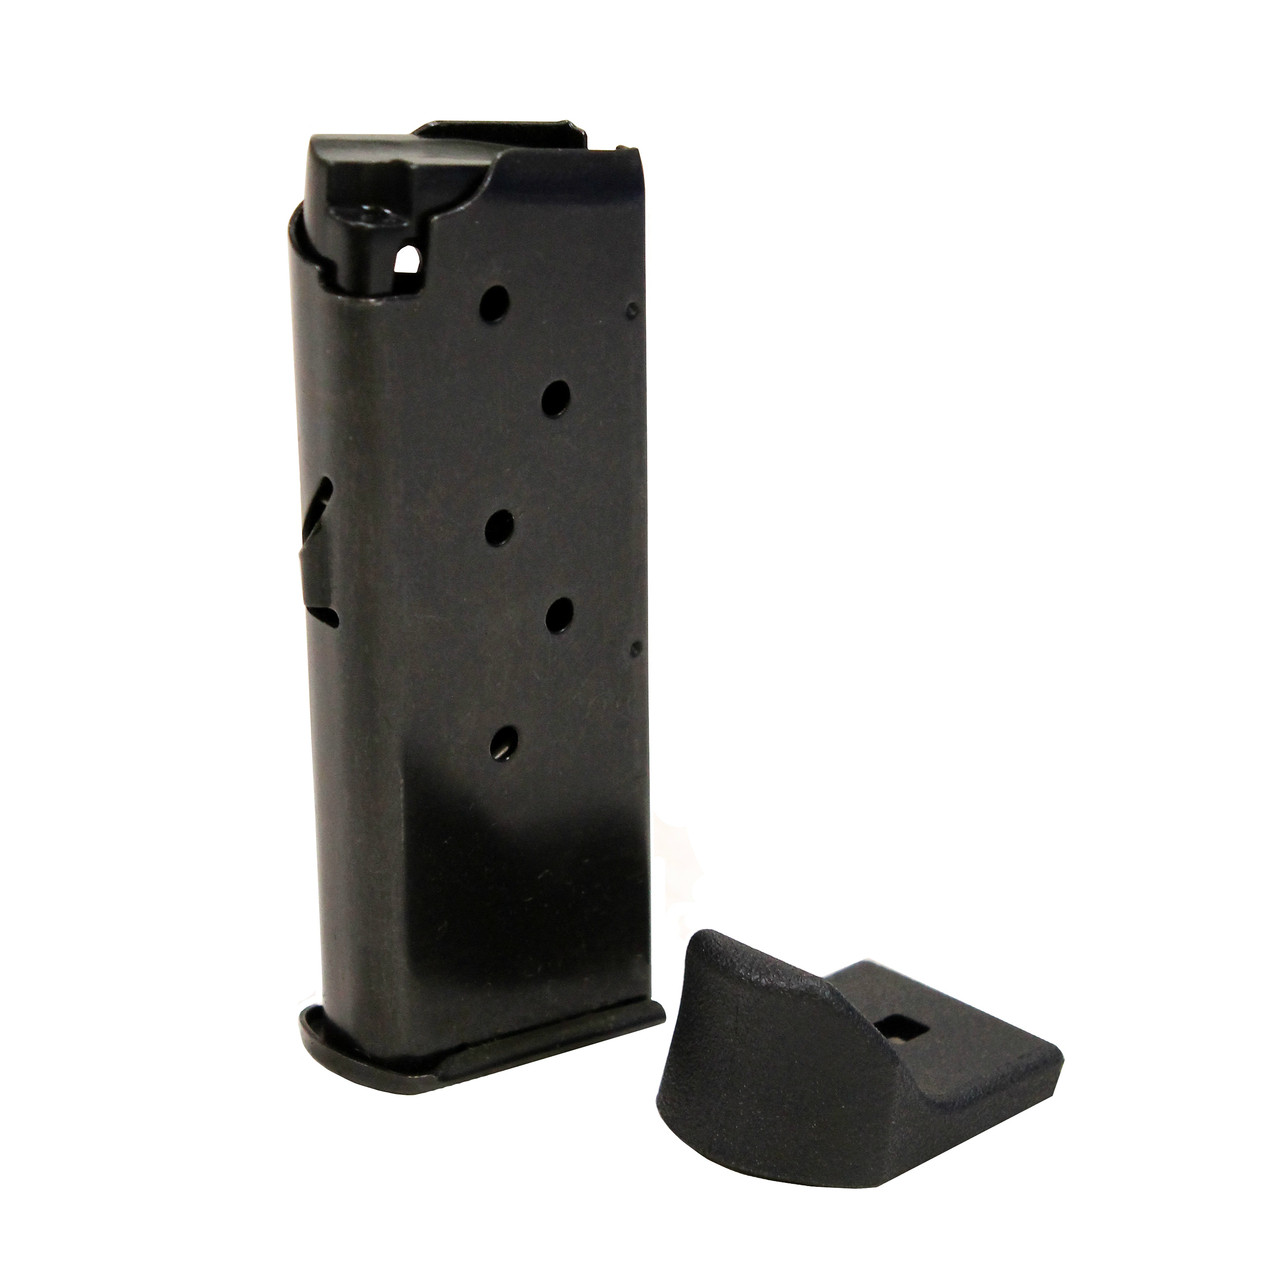 Details about   2-Pack Remington RM380 .380 ACP 6-Round Magazine with Finger Rest 17679